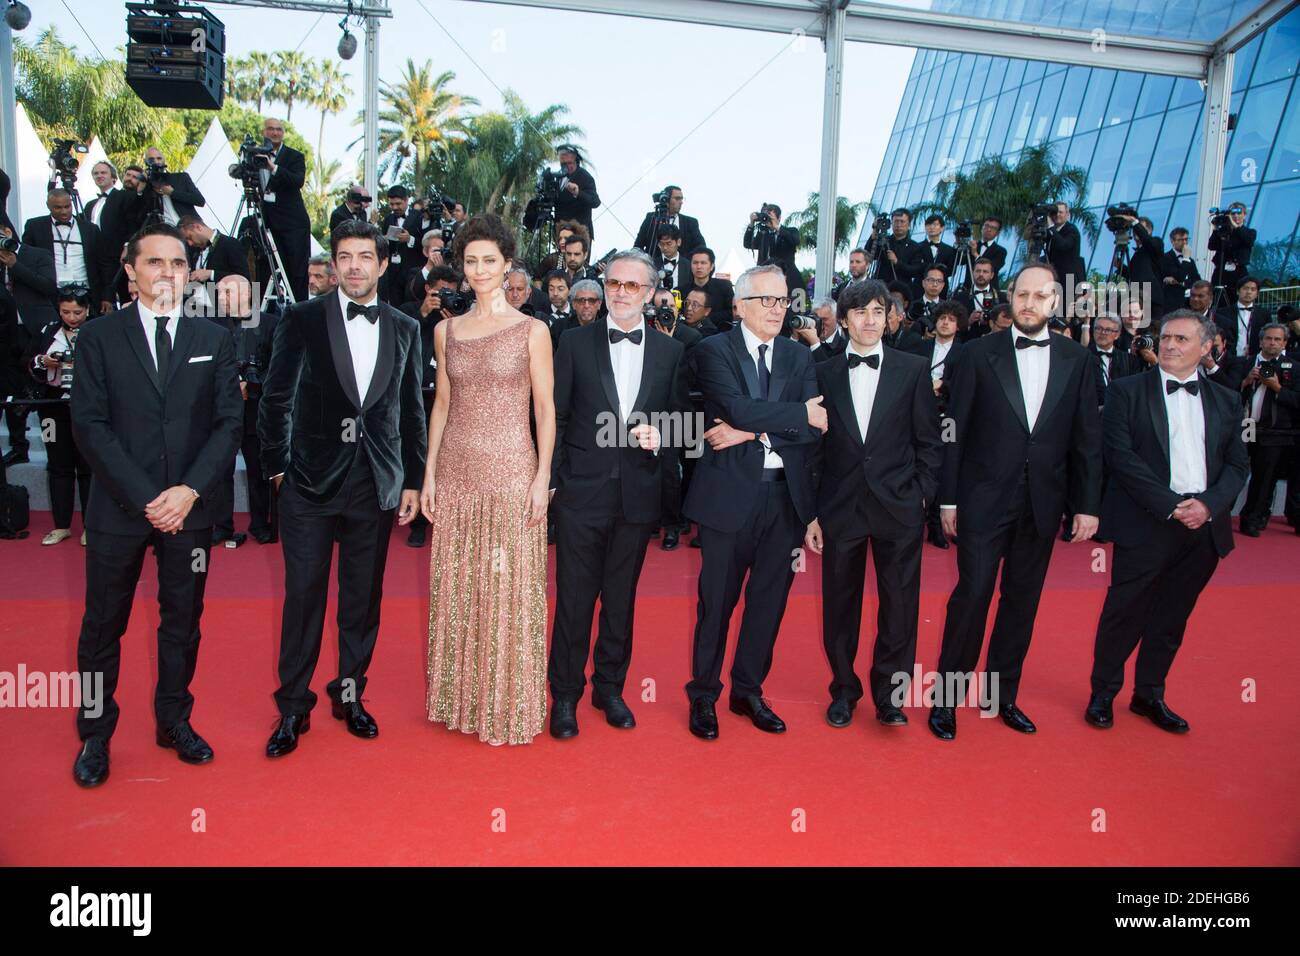 Guest, Pierfrancesco Favino, Maria Fernanda Candido, guest, Marco Bellocchio, Luigi Lo Cascio, Fausto Russo Alesi, and guest attends The Traitor Red Carpet during 72nd Cannes film festival on May 23, 2019 in Cannes, France. Photo by Nasser Berzane/ABACAPRESS.COM Stock Photo